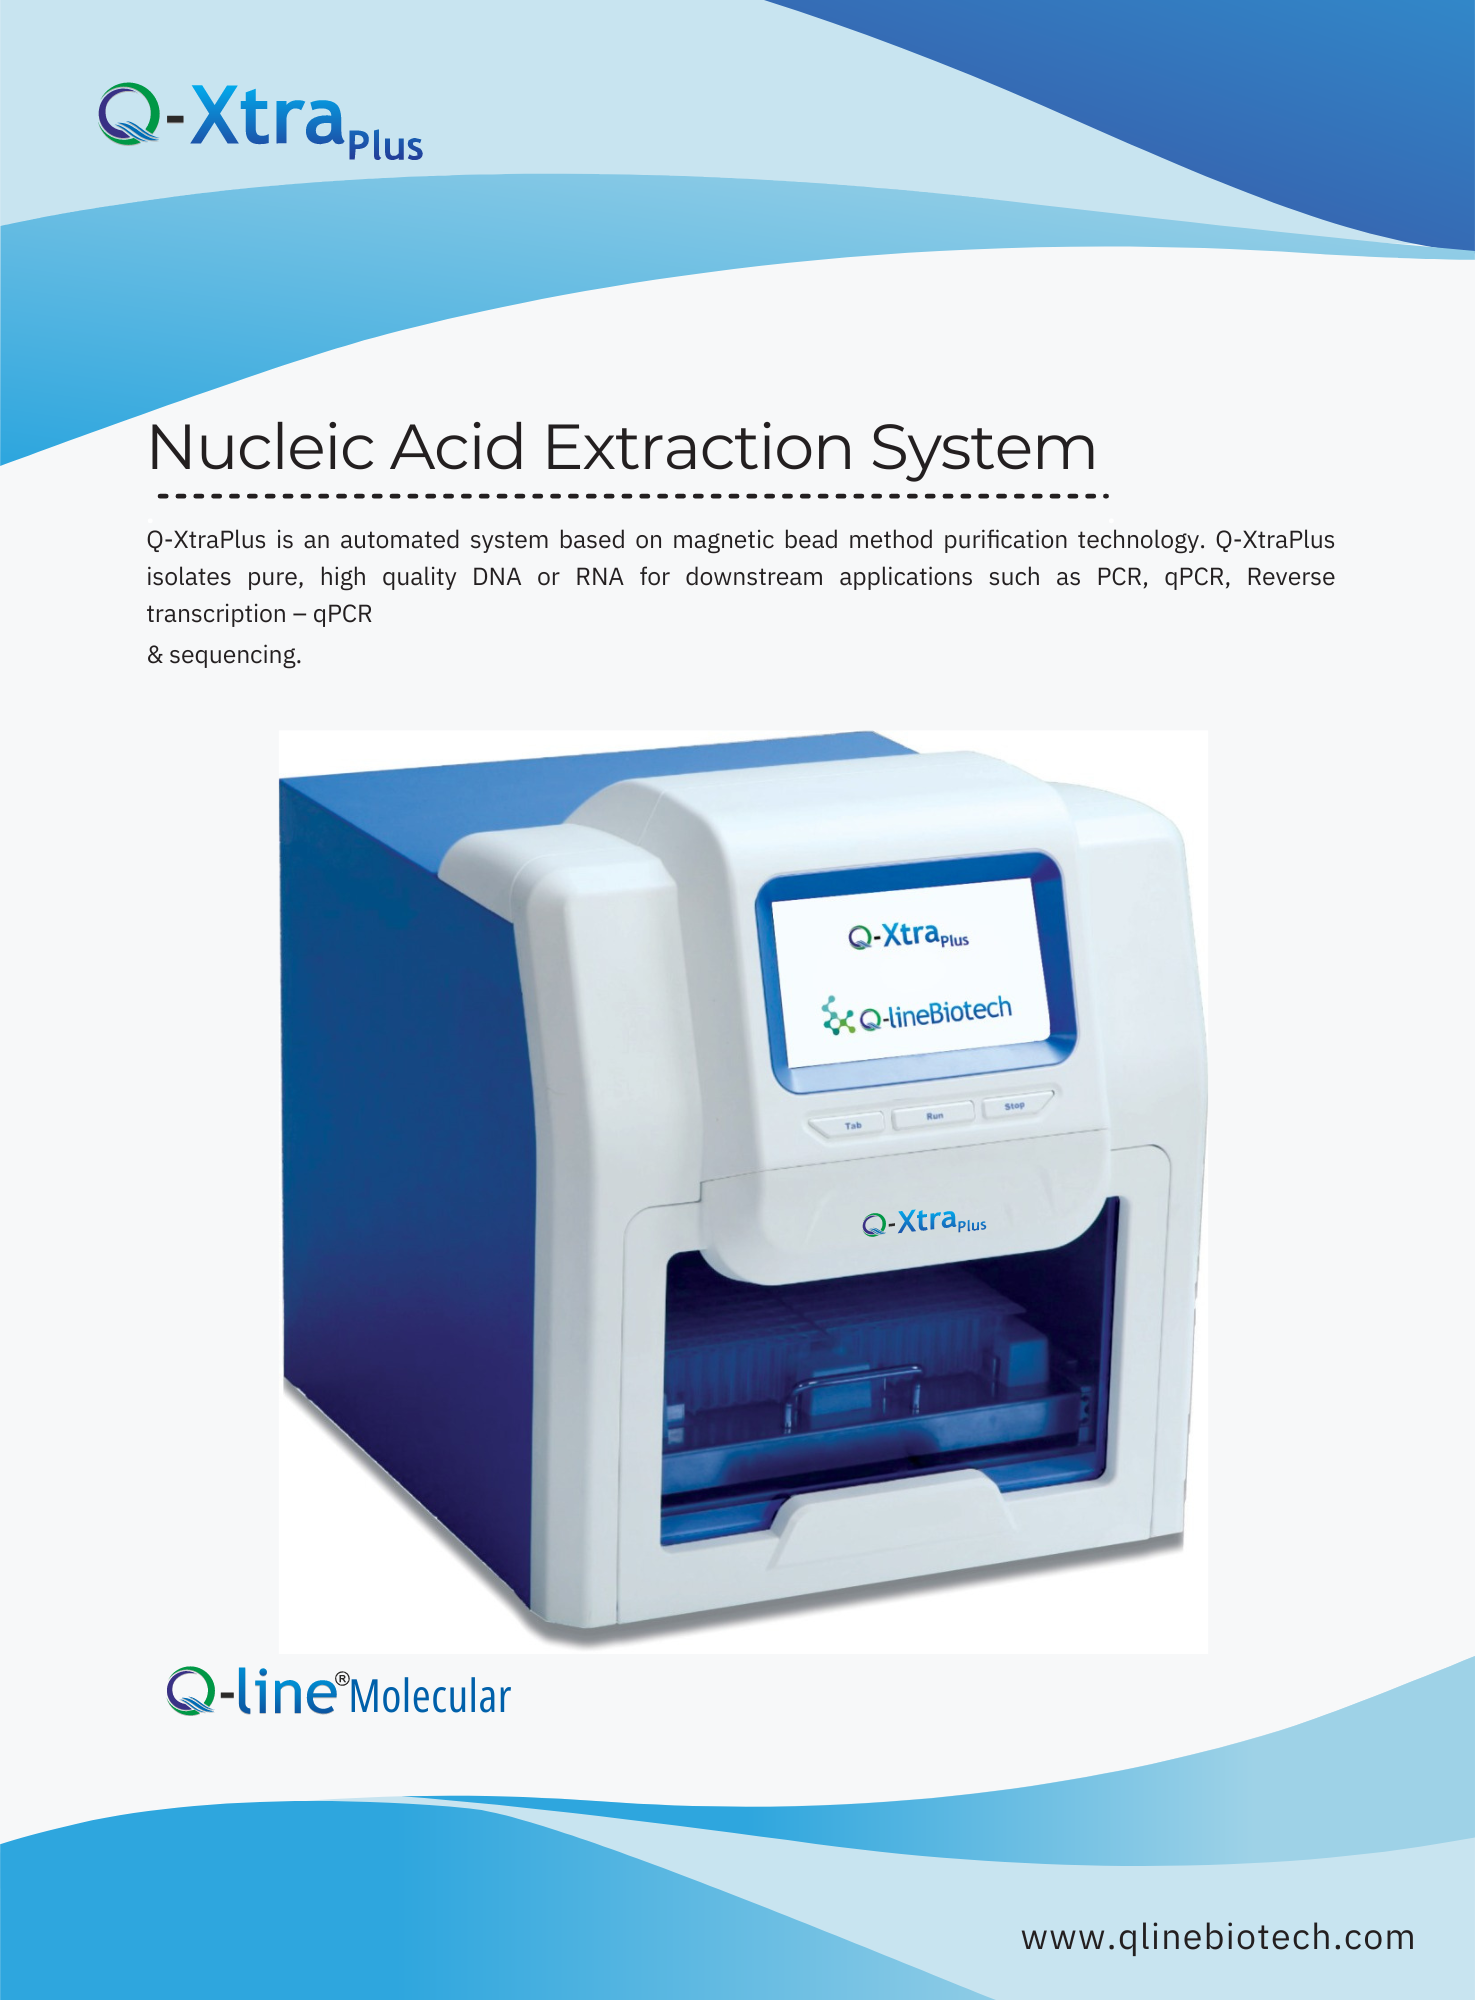 Q-Xtra Plus 32W Extraction system